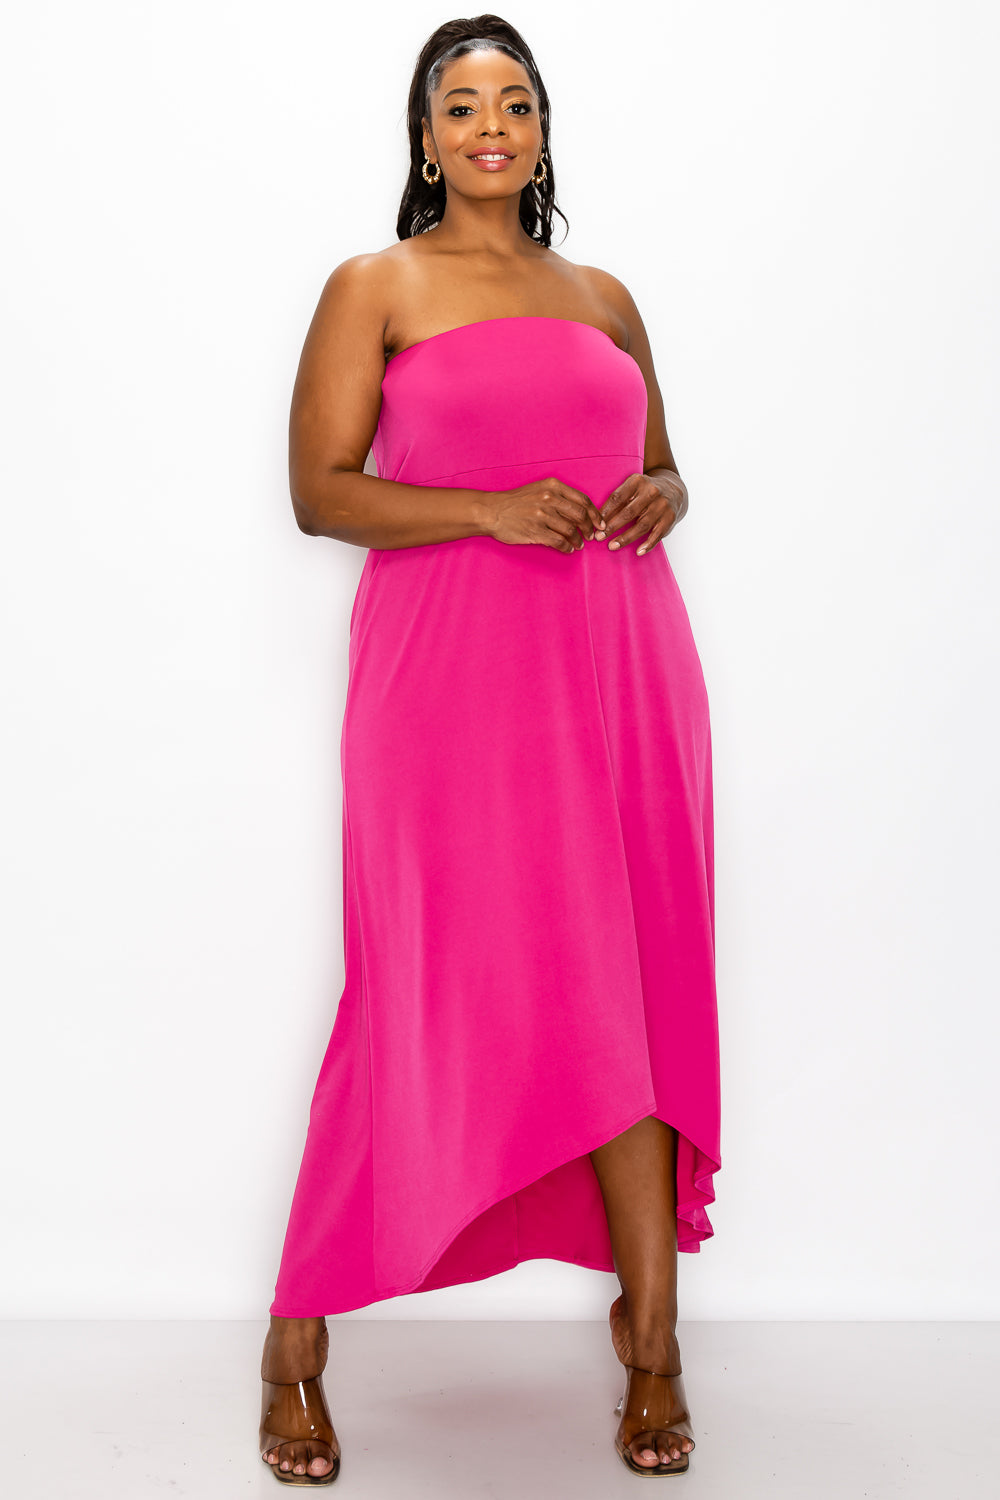 livd plus size boutique strapless high low dress in fuchsia